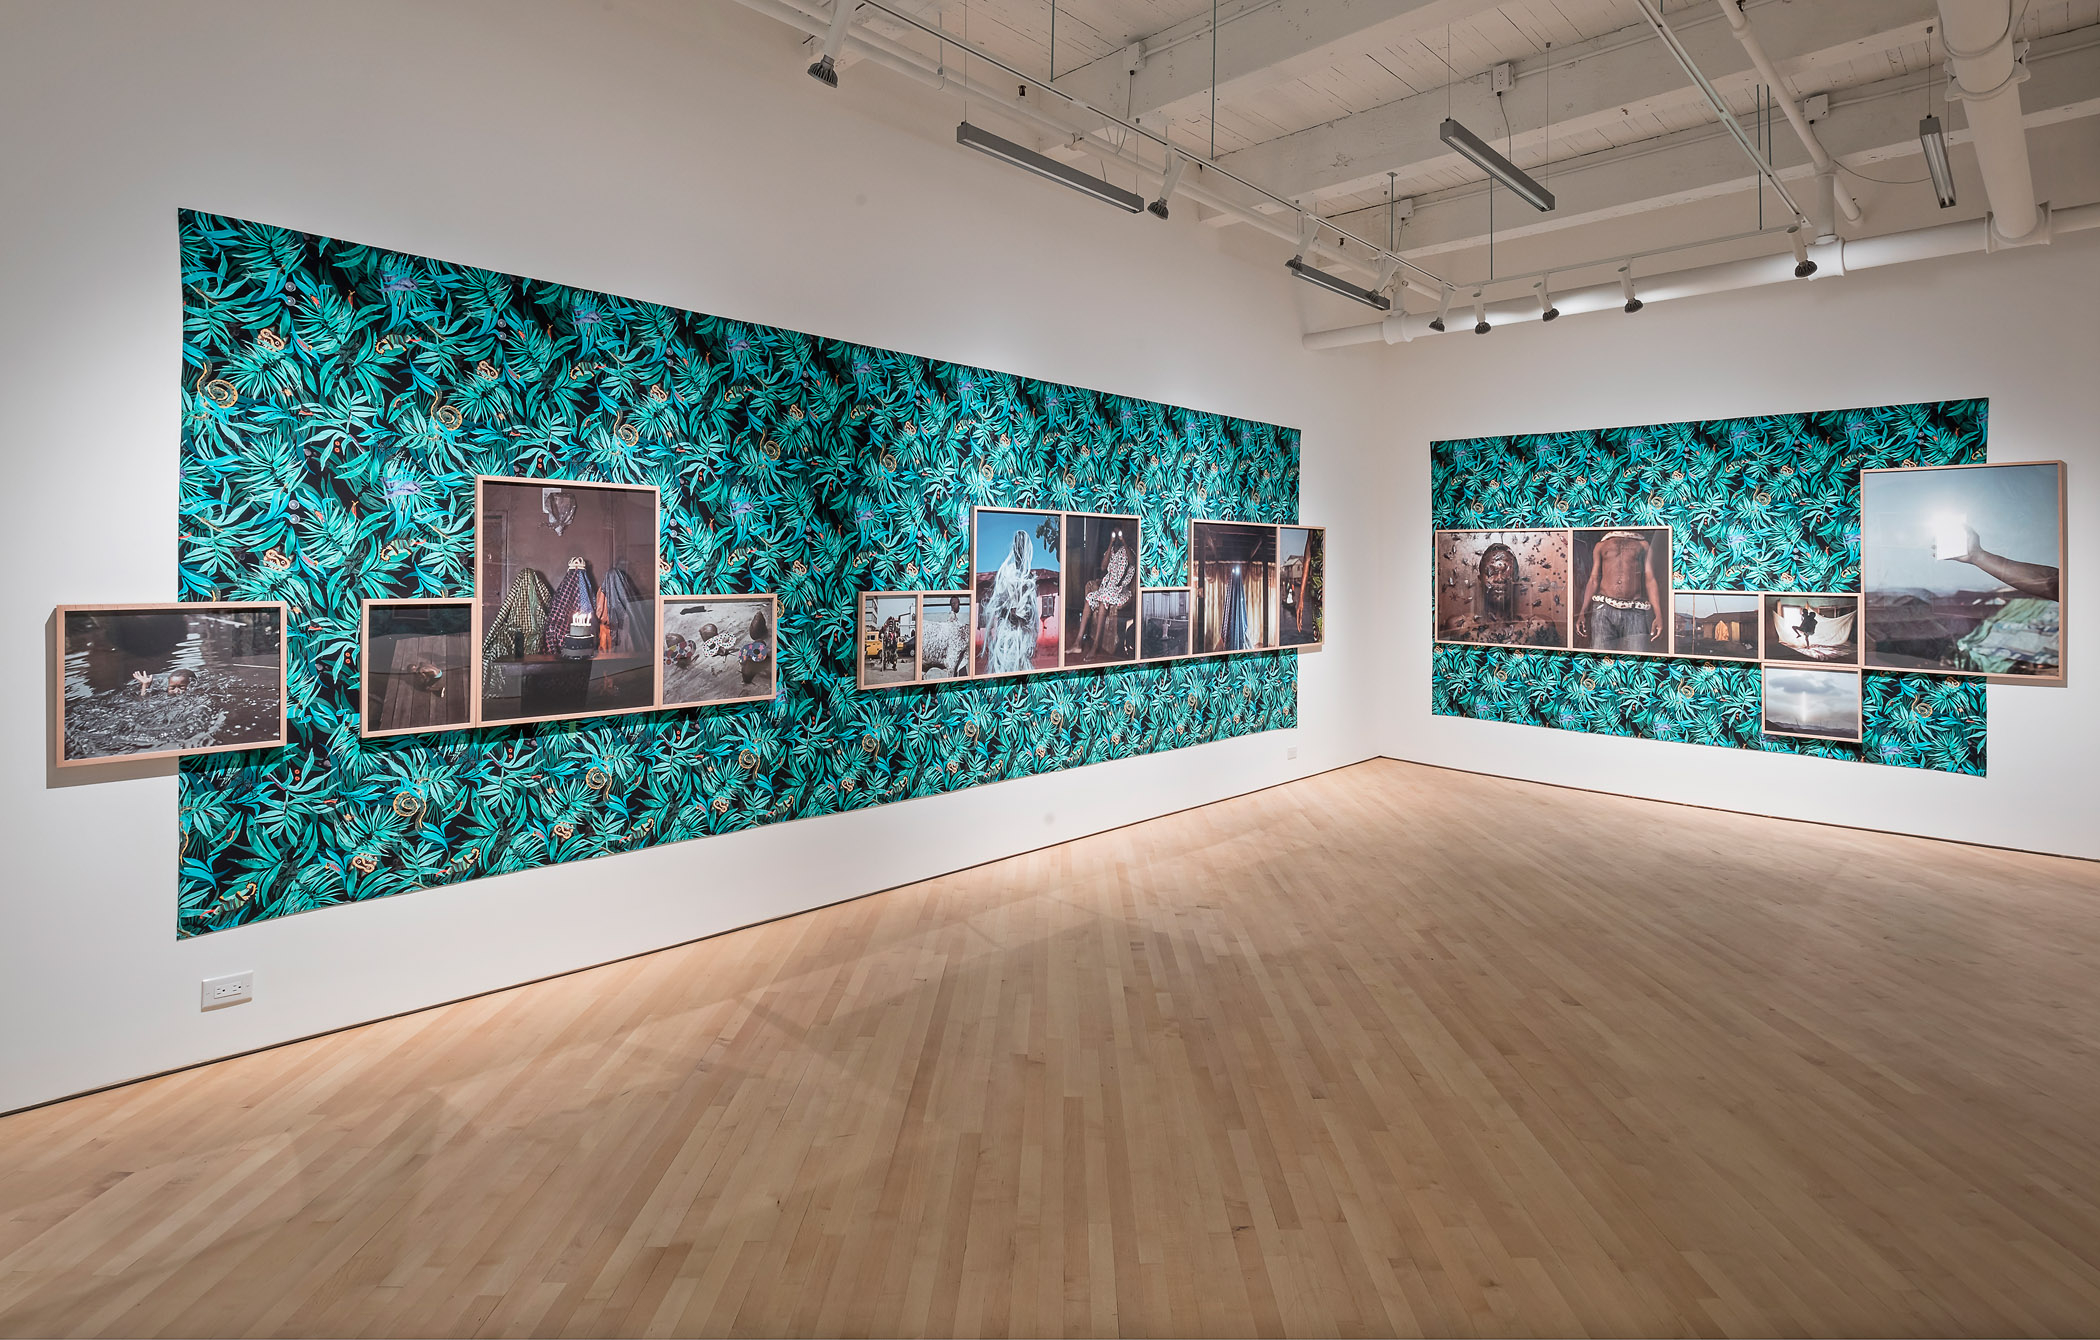     Installation view of Cristina de Middel, This is What Hatred Did, 2015

